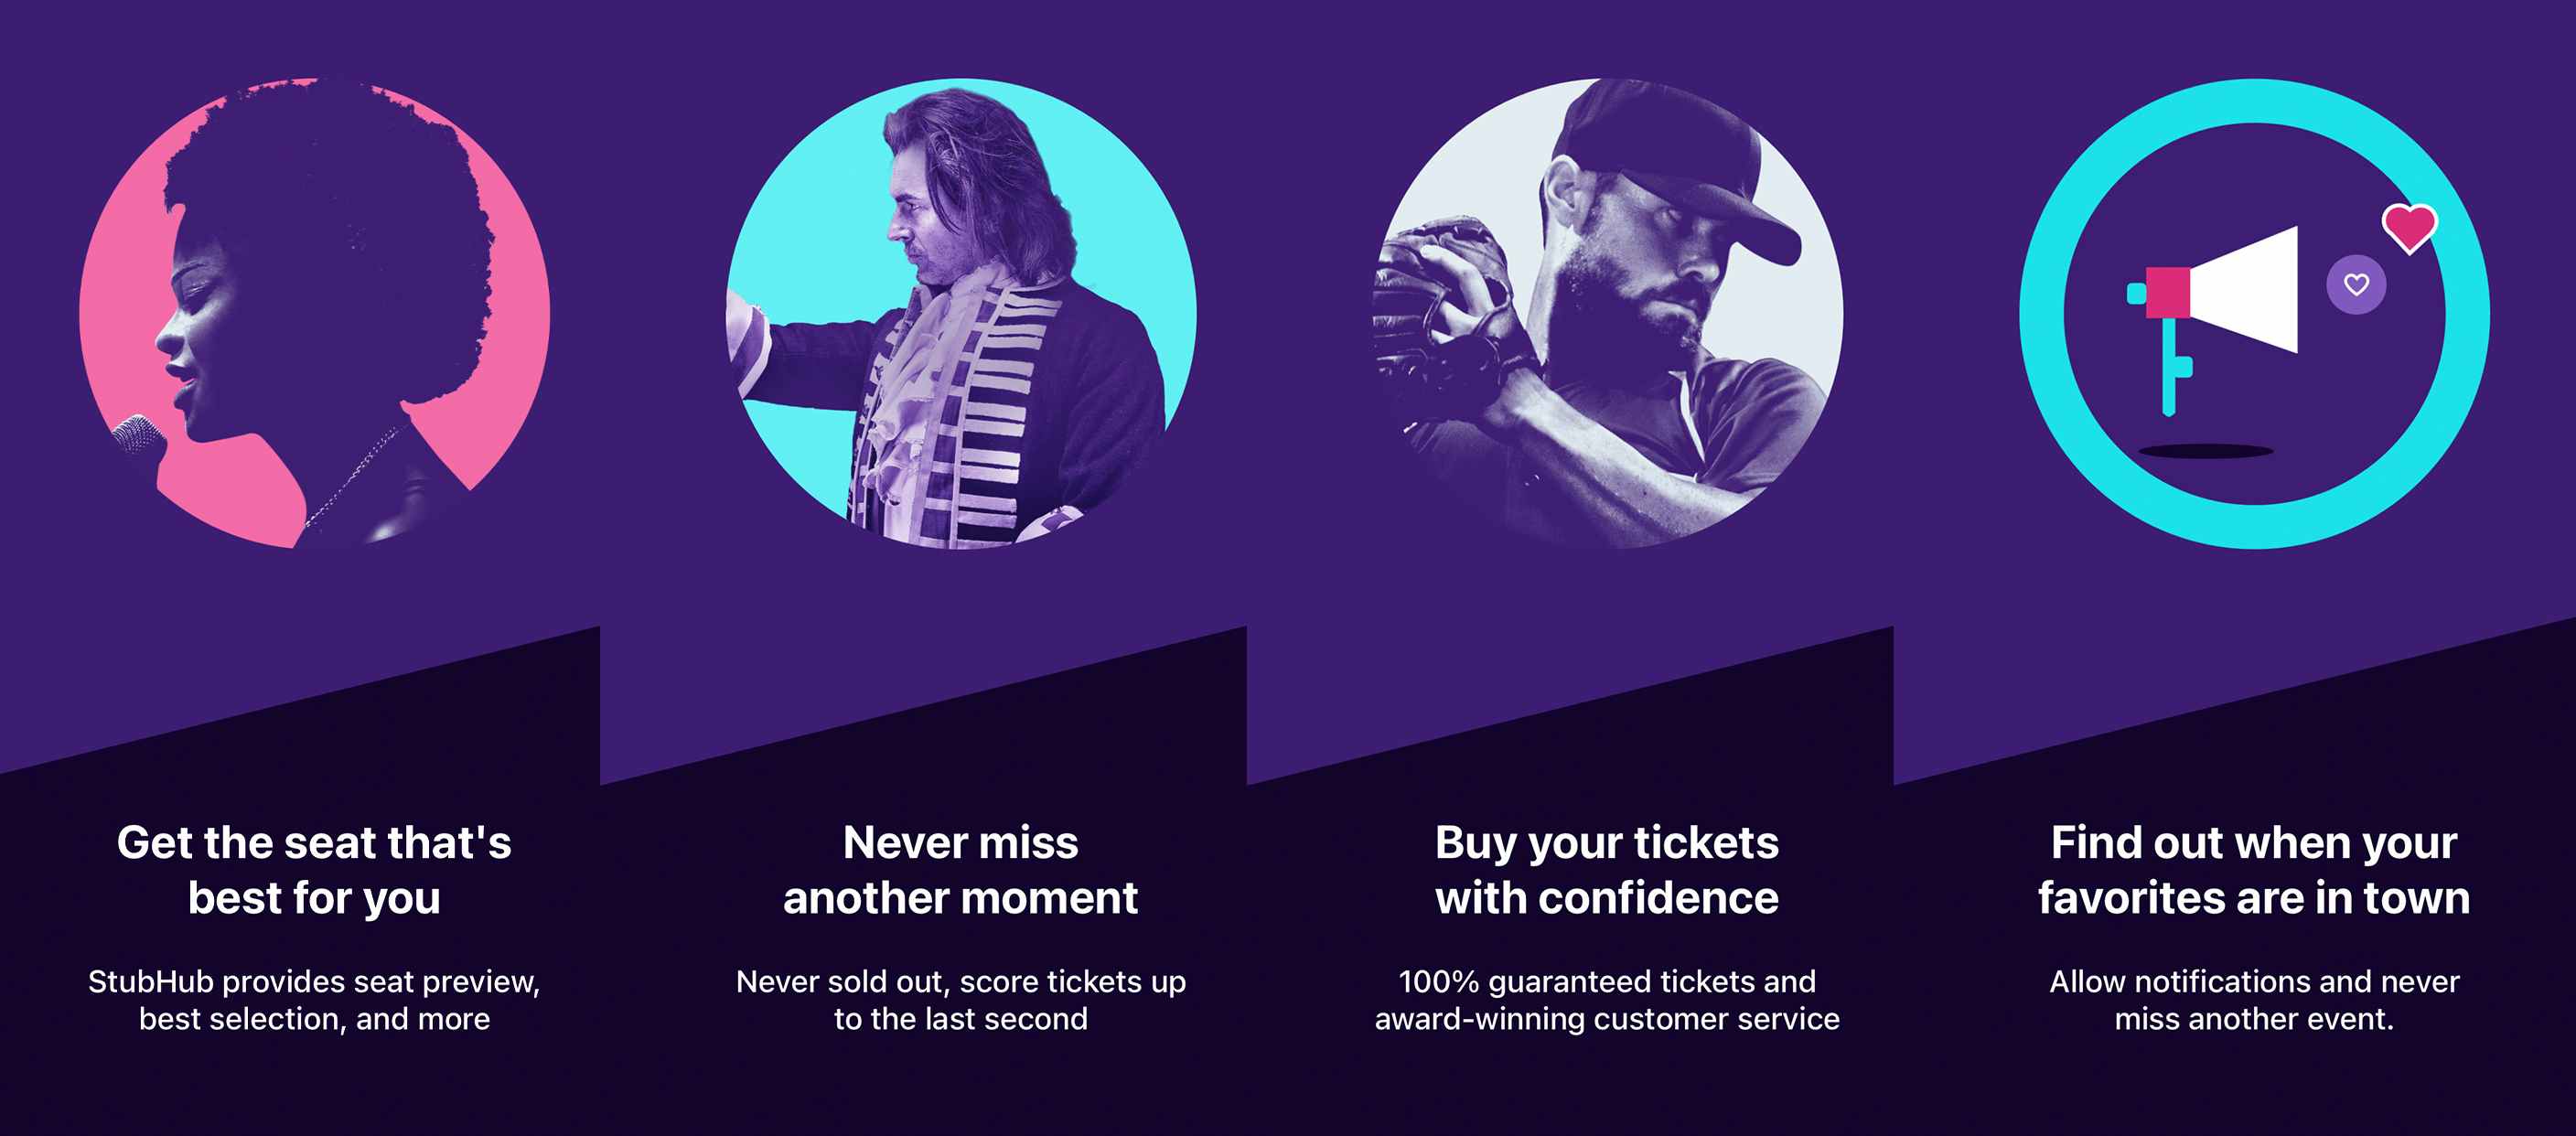 A graphic introducing new users to their StubHub account on the app.